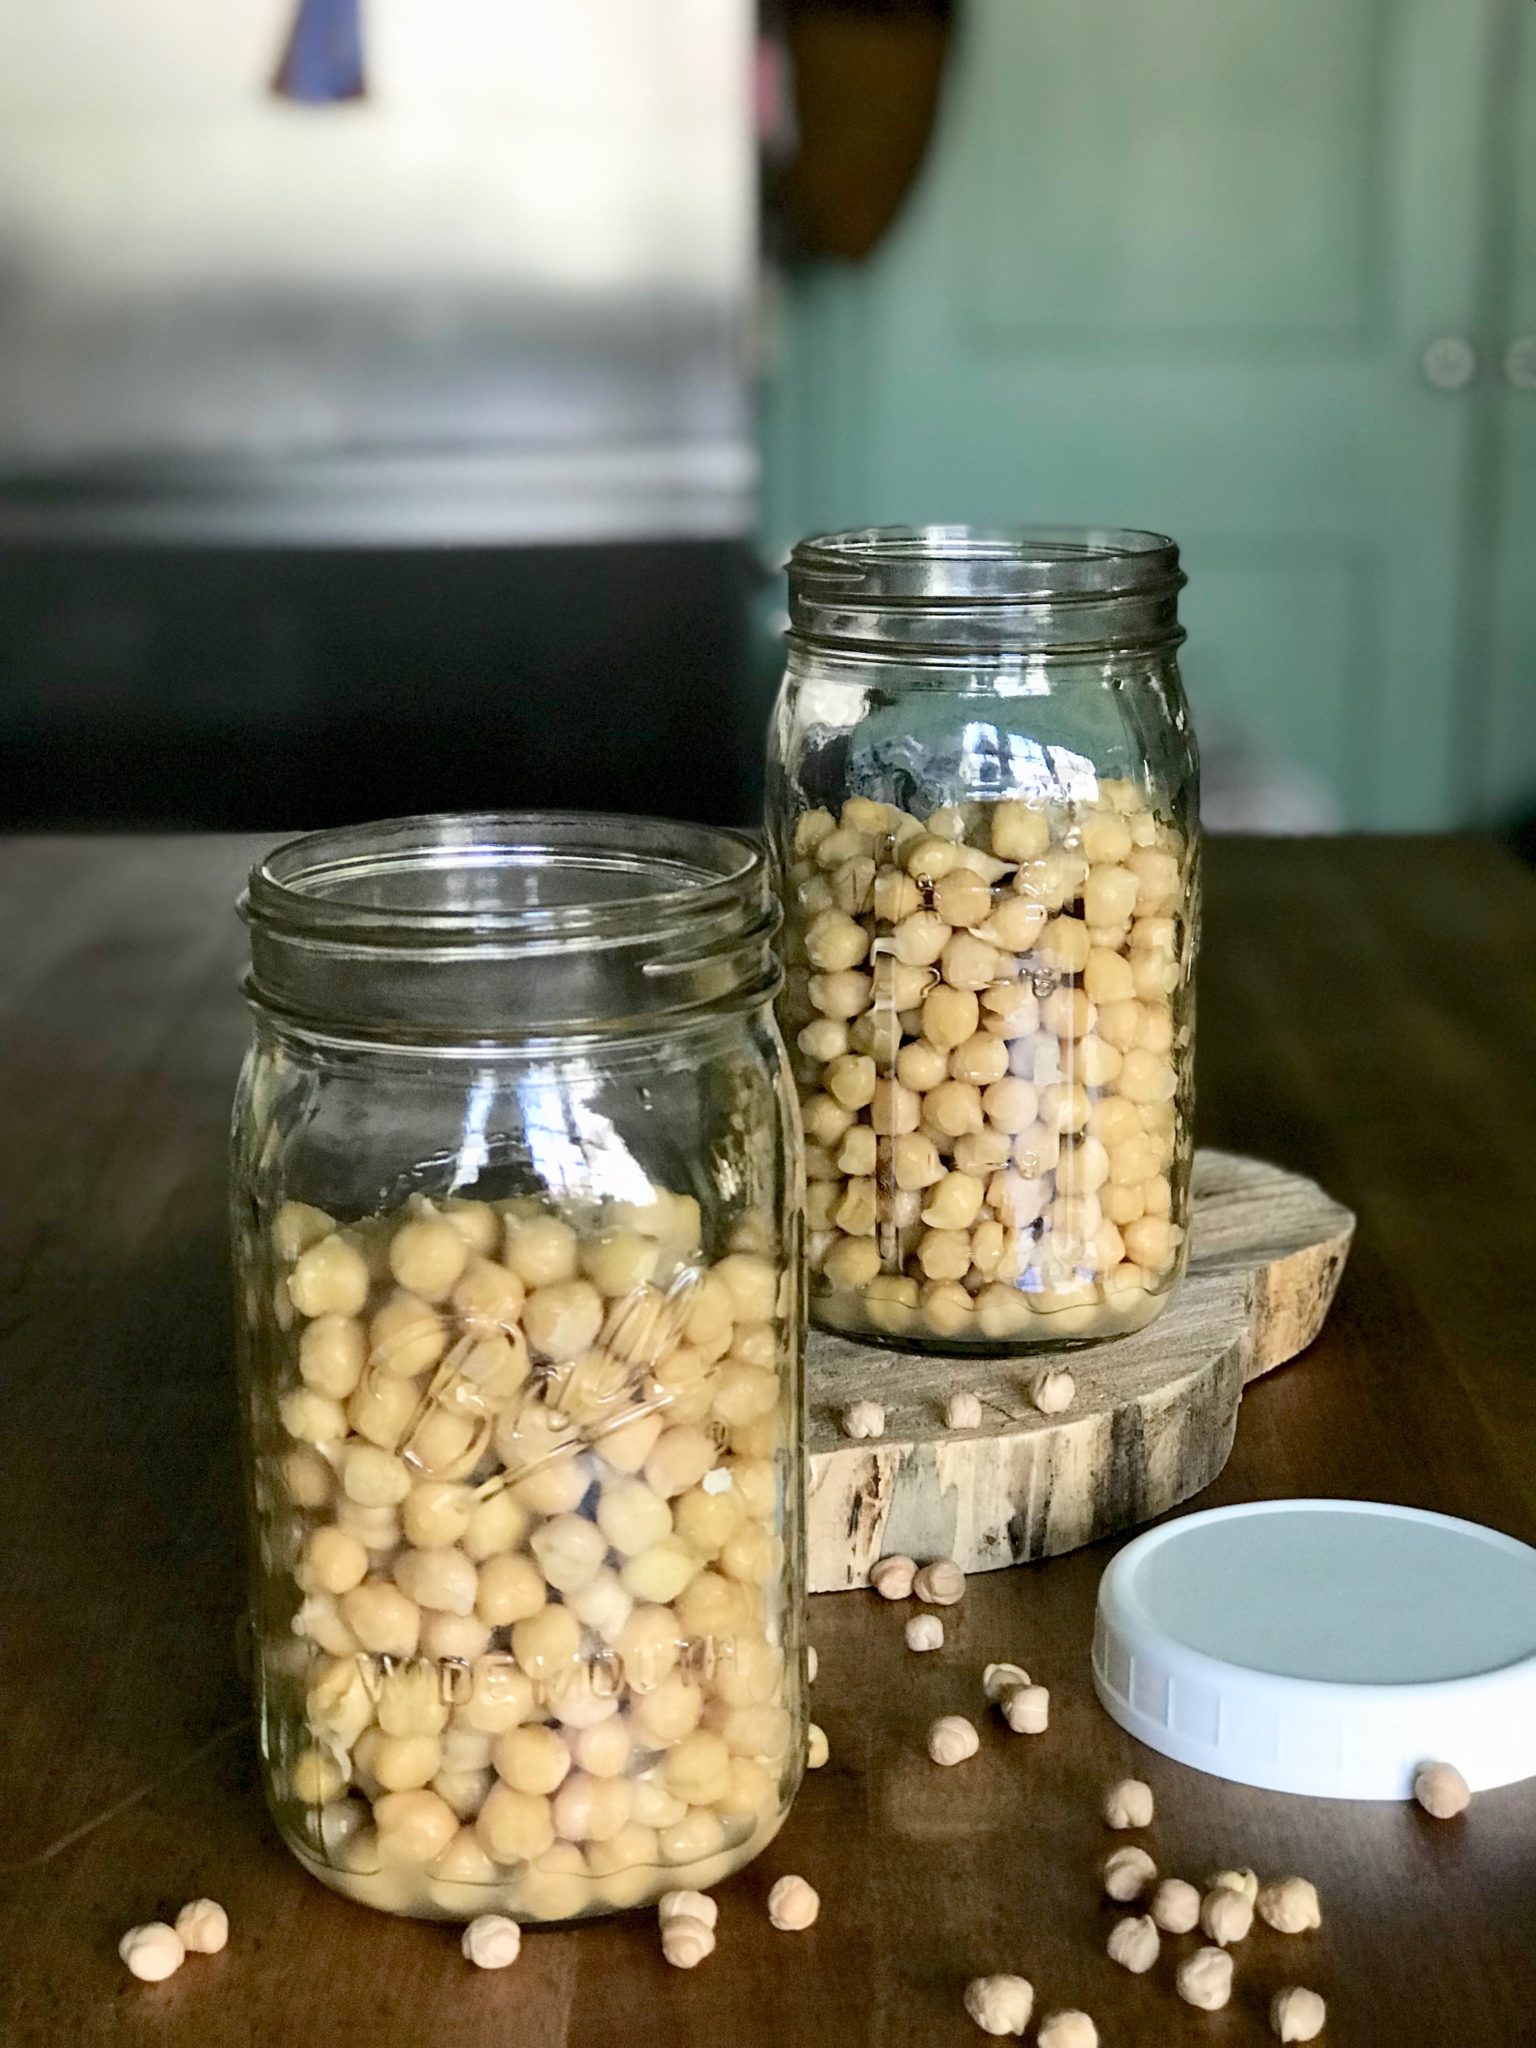 Sprouted Garbanzo Beans or Chickpeas